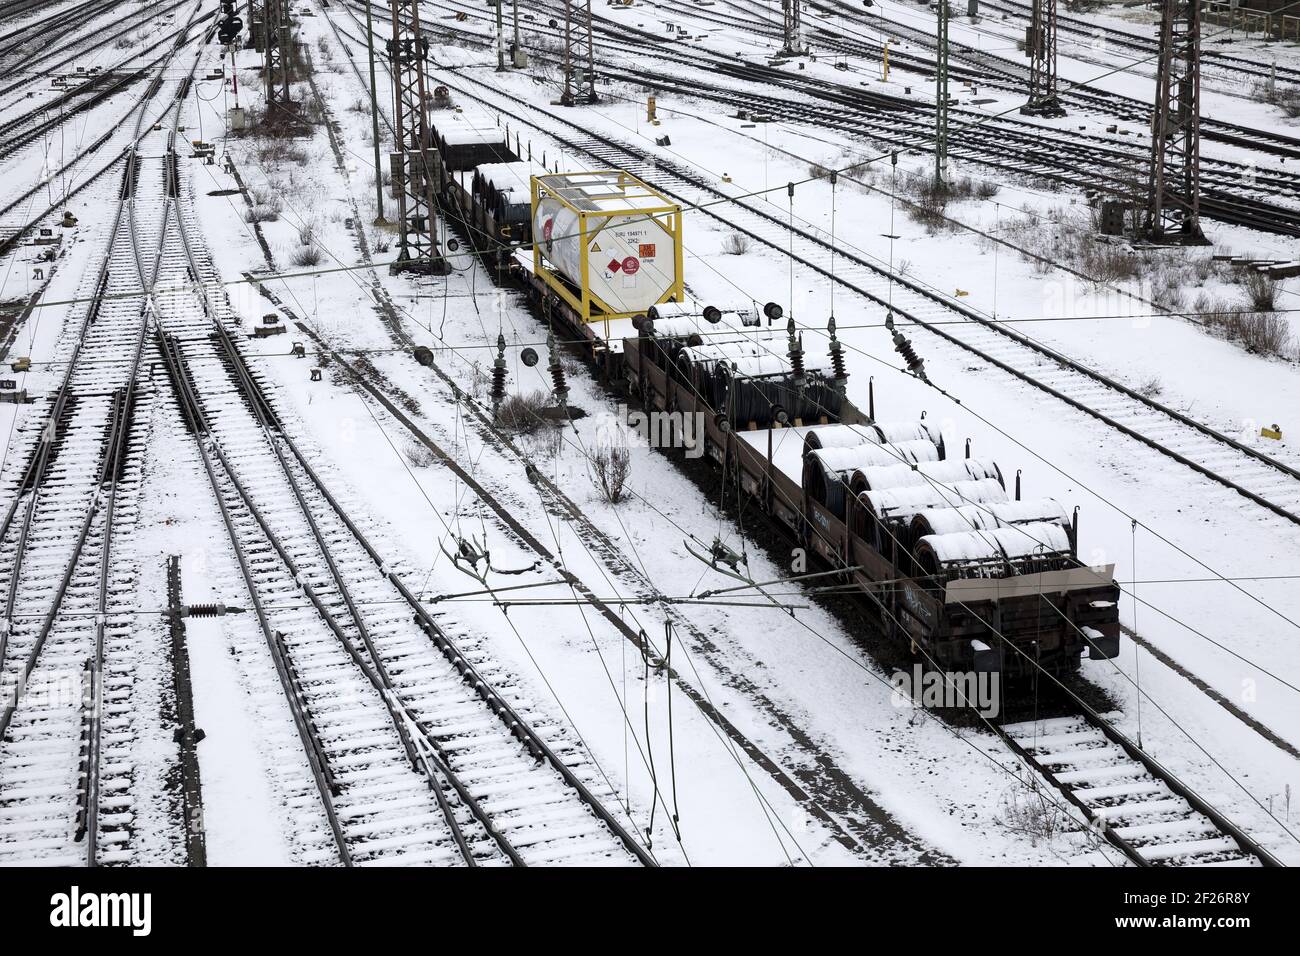 Train formation system in the Vorhalle district in winter, freight trains, Hagen, Germany, Europe Stock Photo